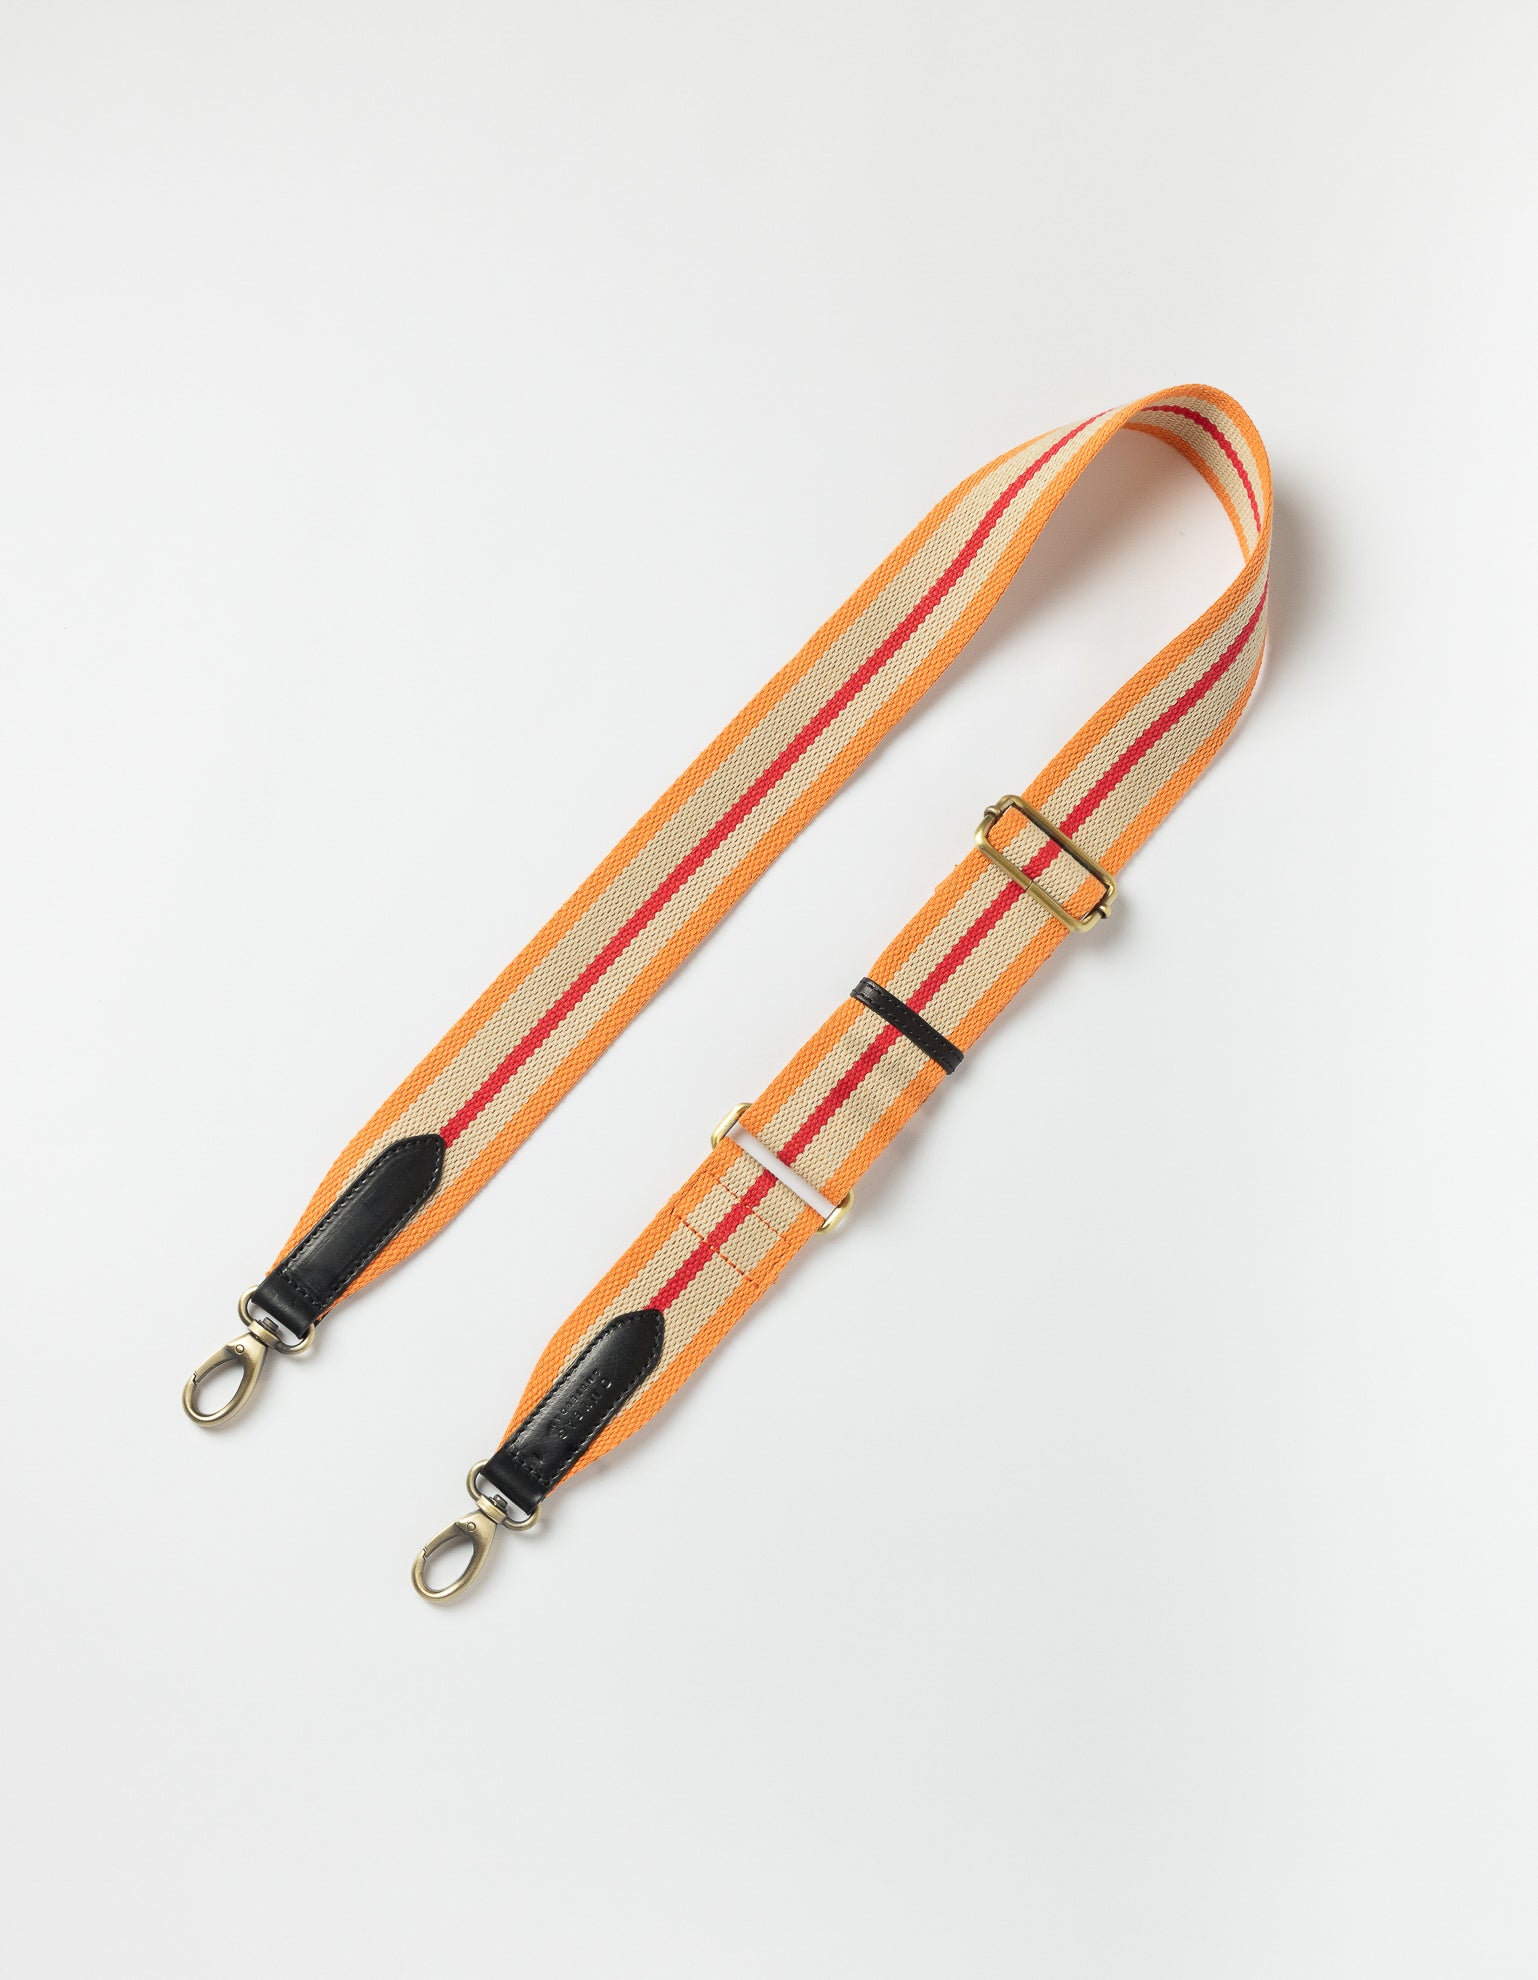 Webbing Strap Orange & Red with Black Classic Leather